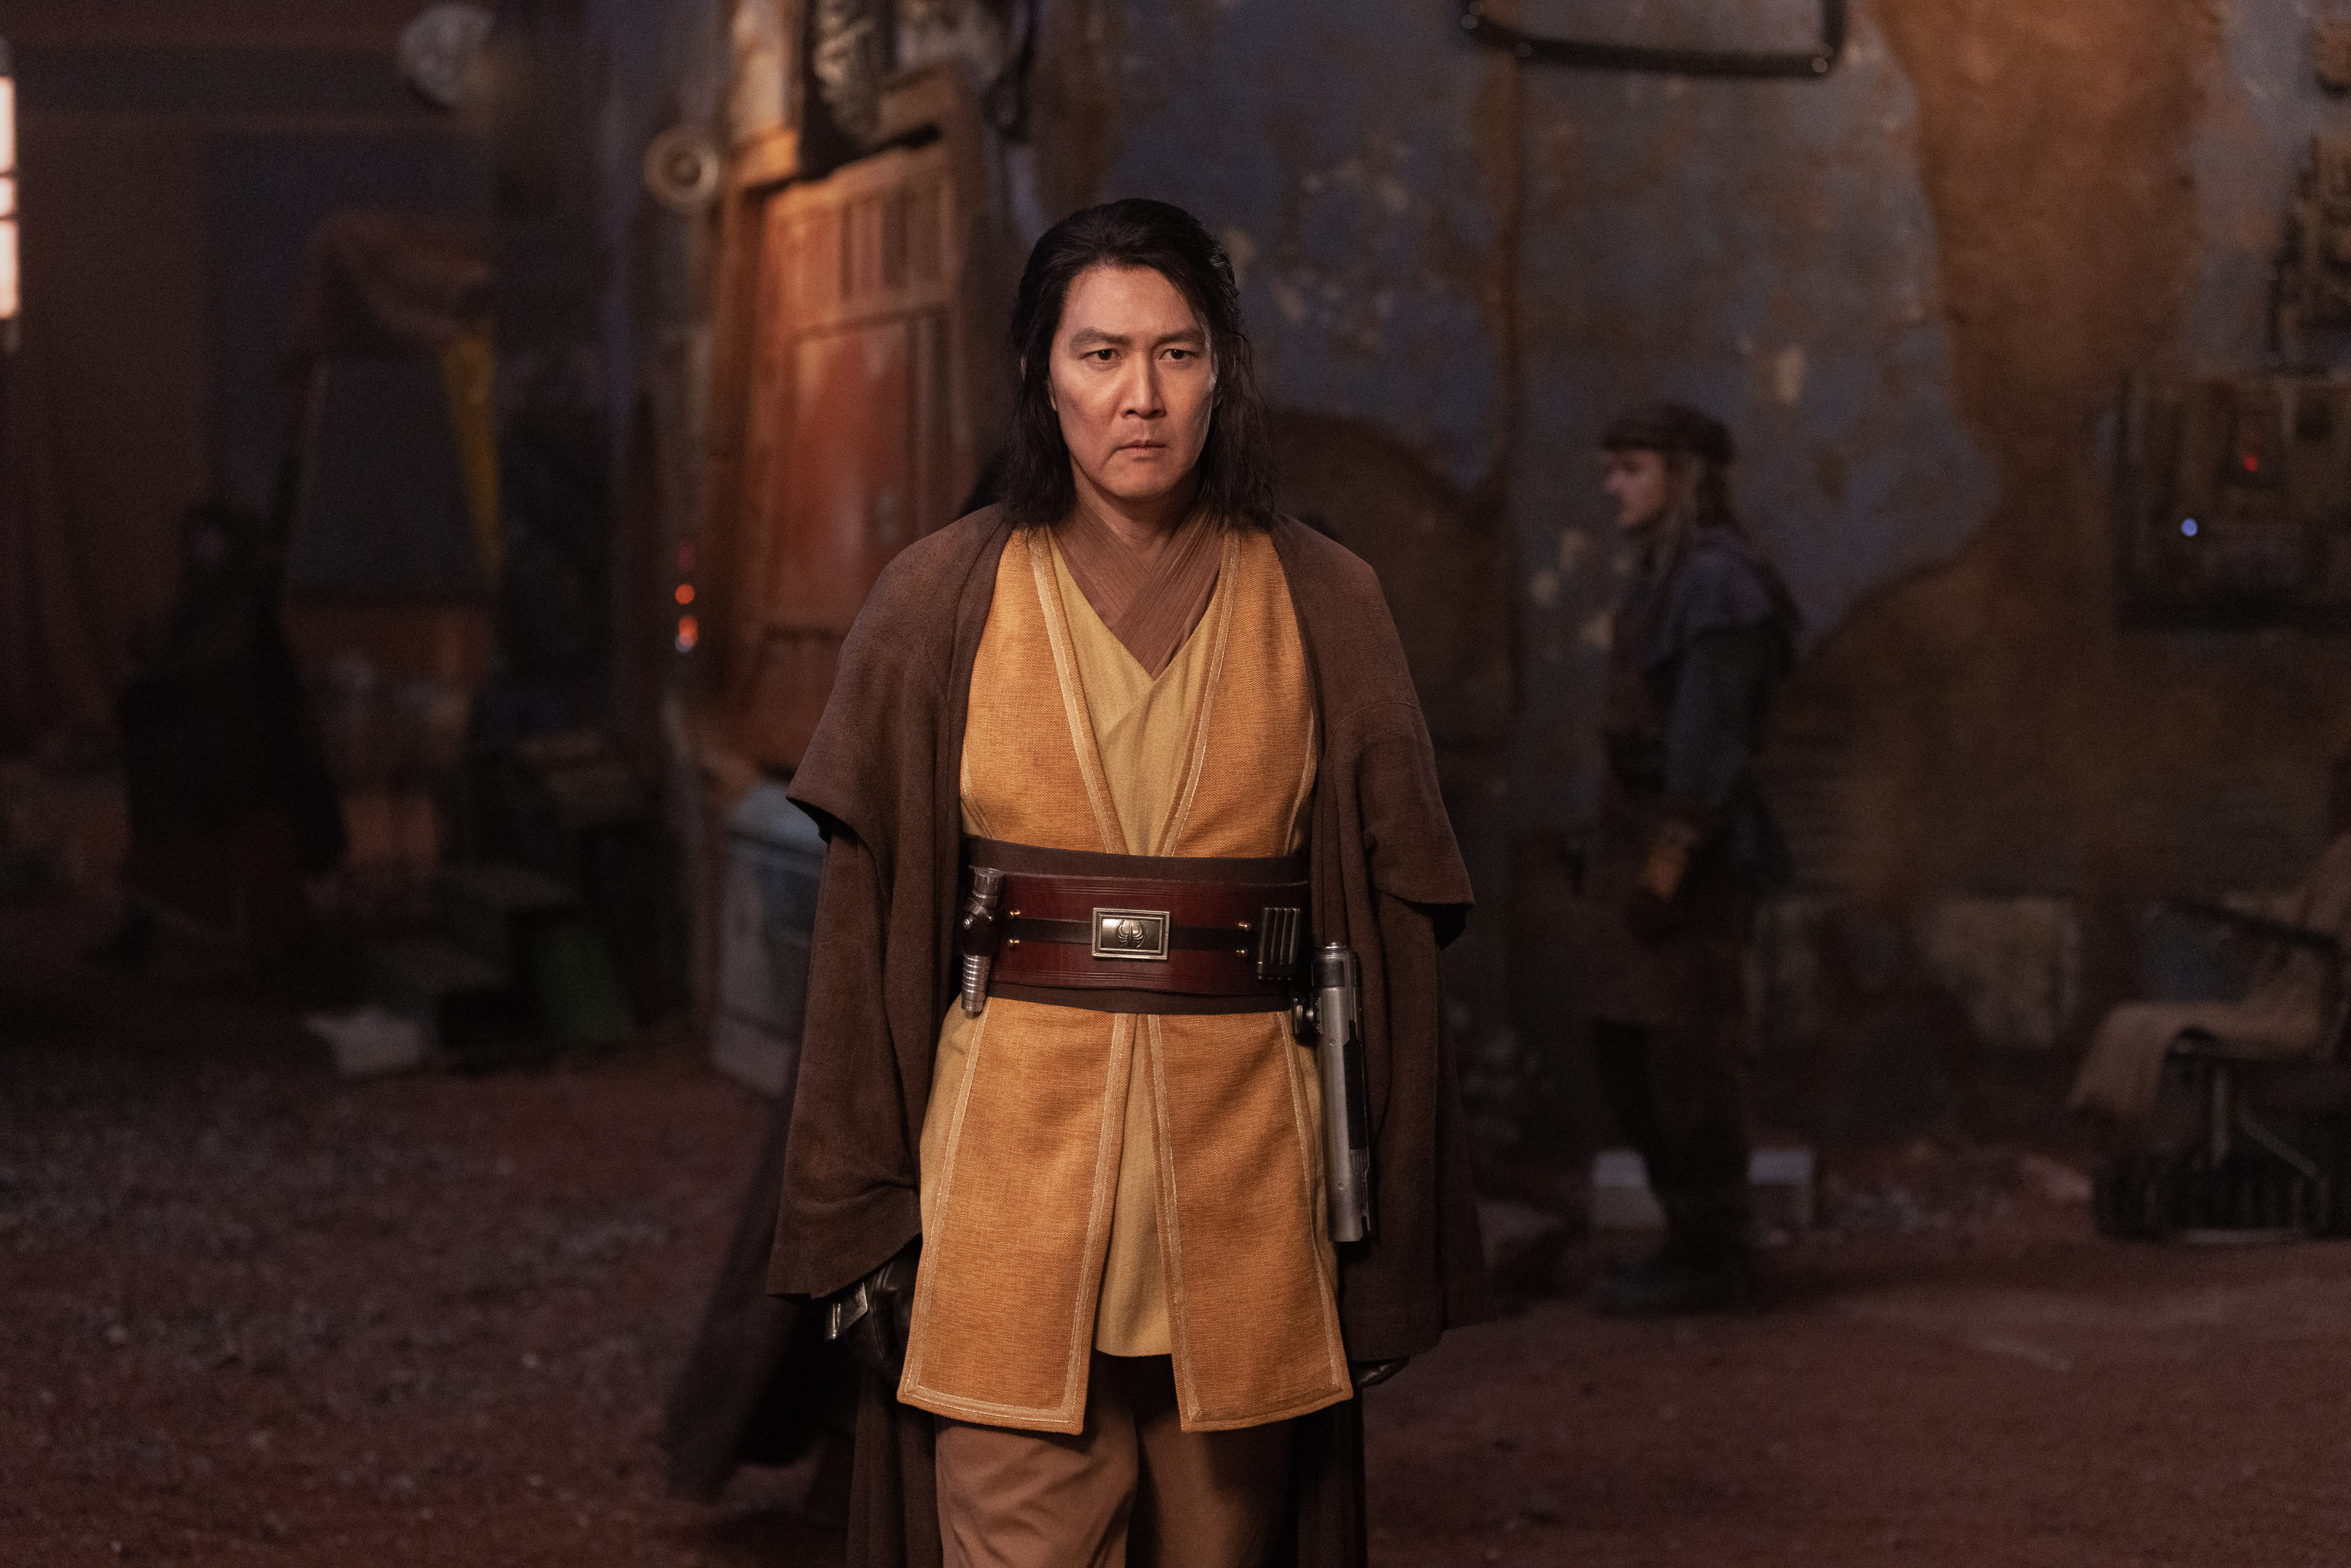 The Acolyte's Lee Jung-jae is an 'instant favourite' for Star Wars fans